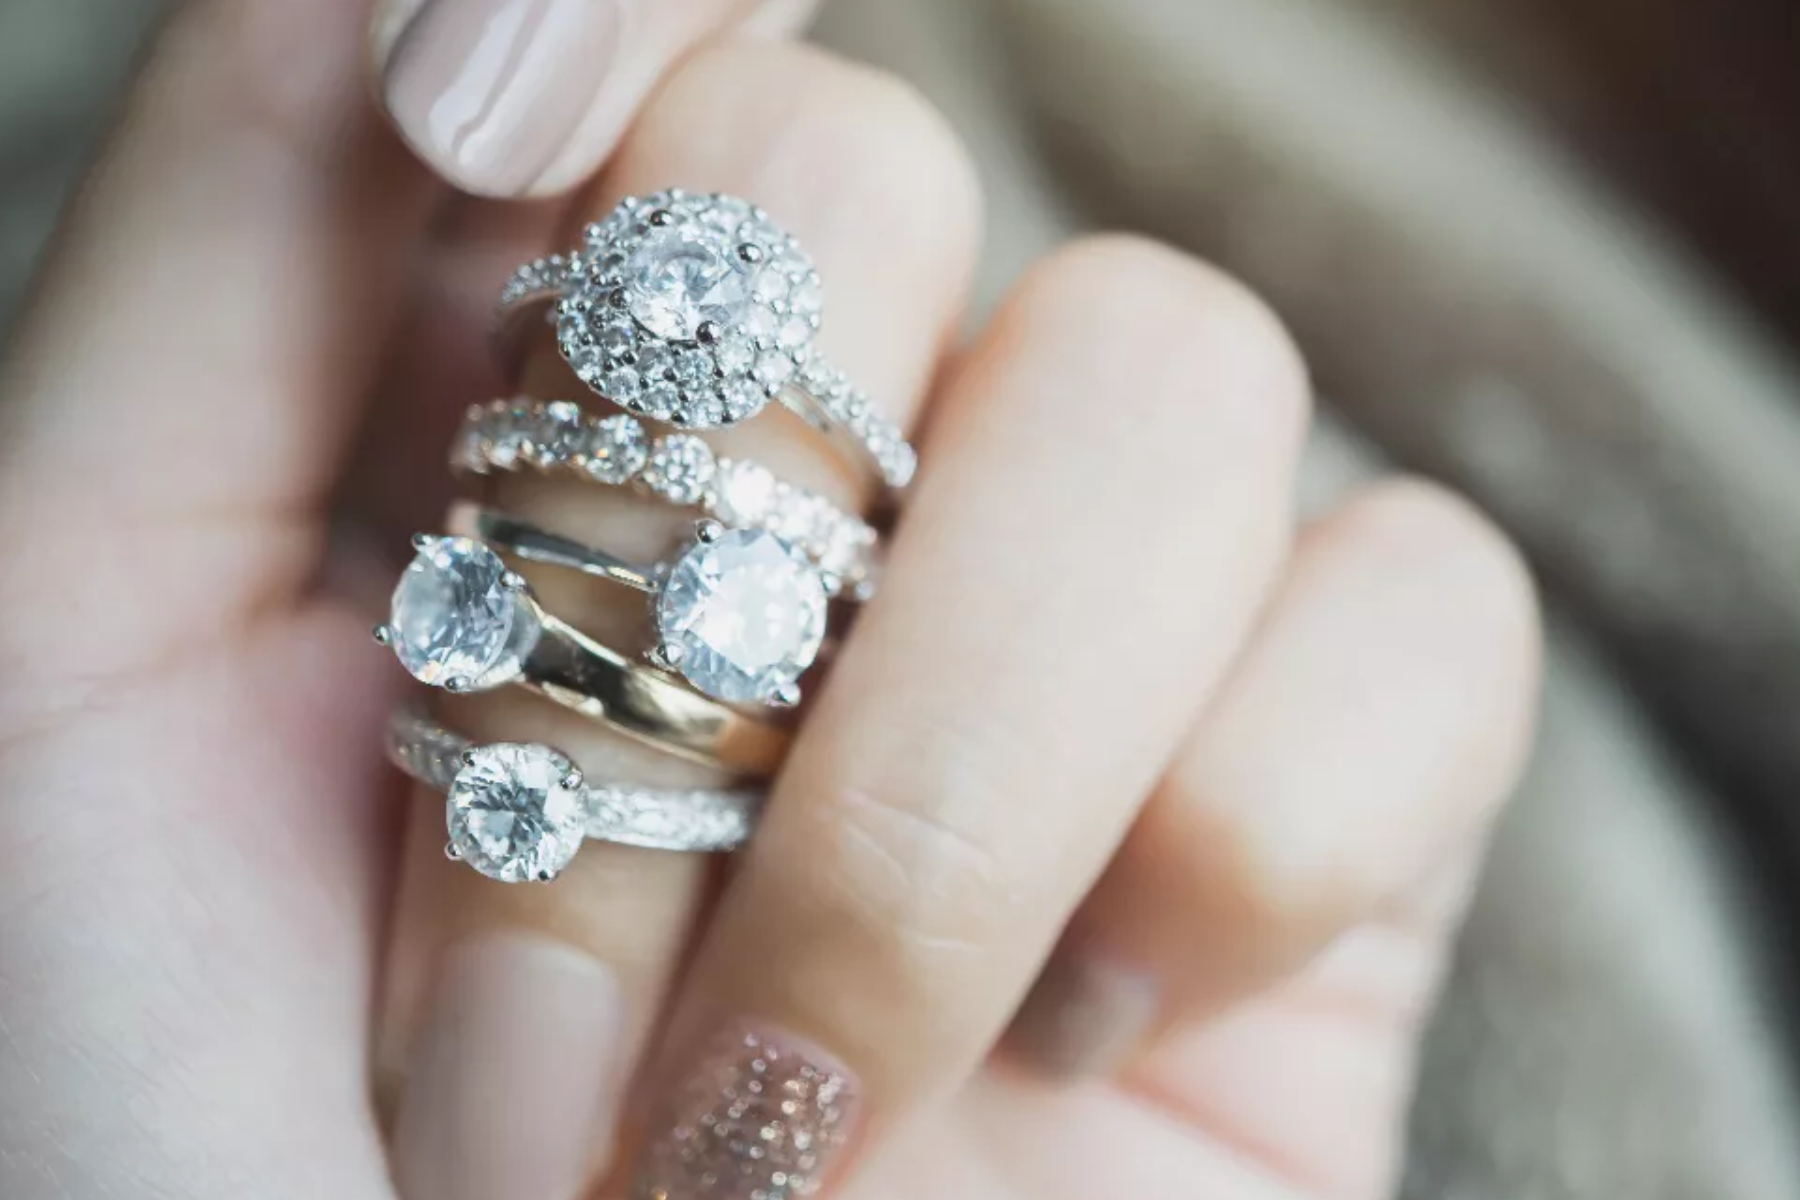 Five diamond engagement rings on a woman's finger